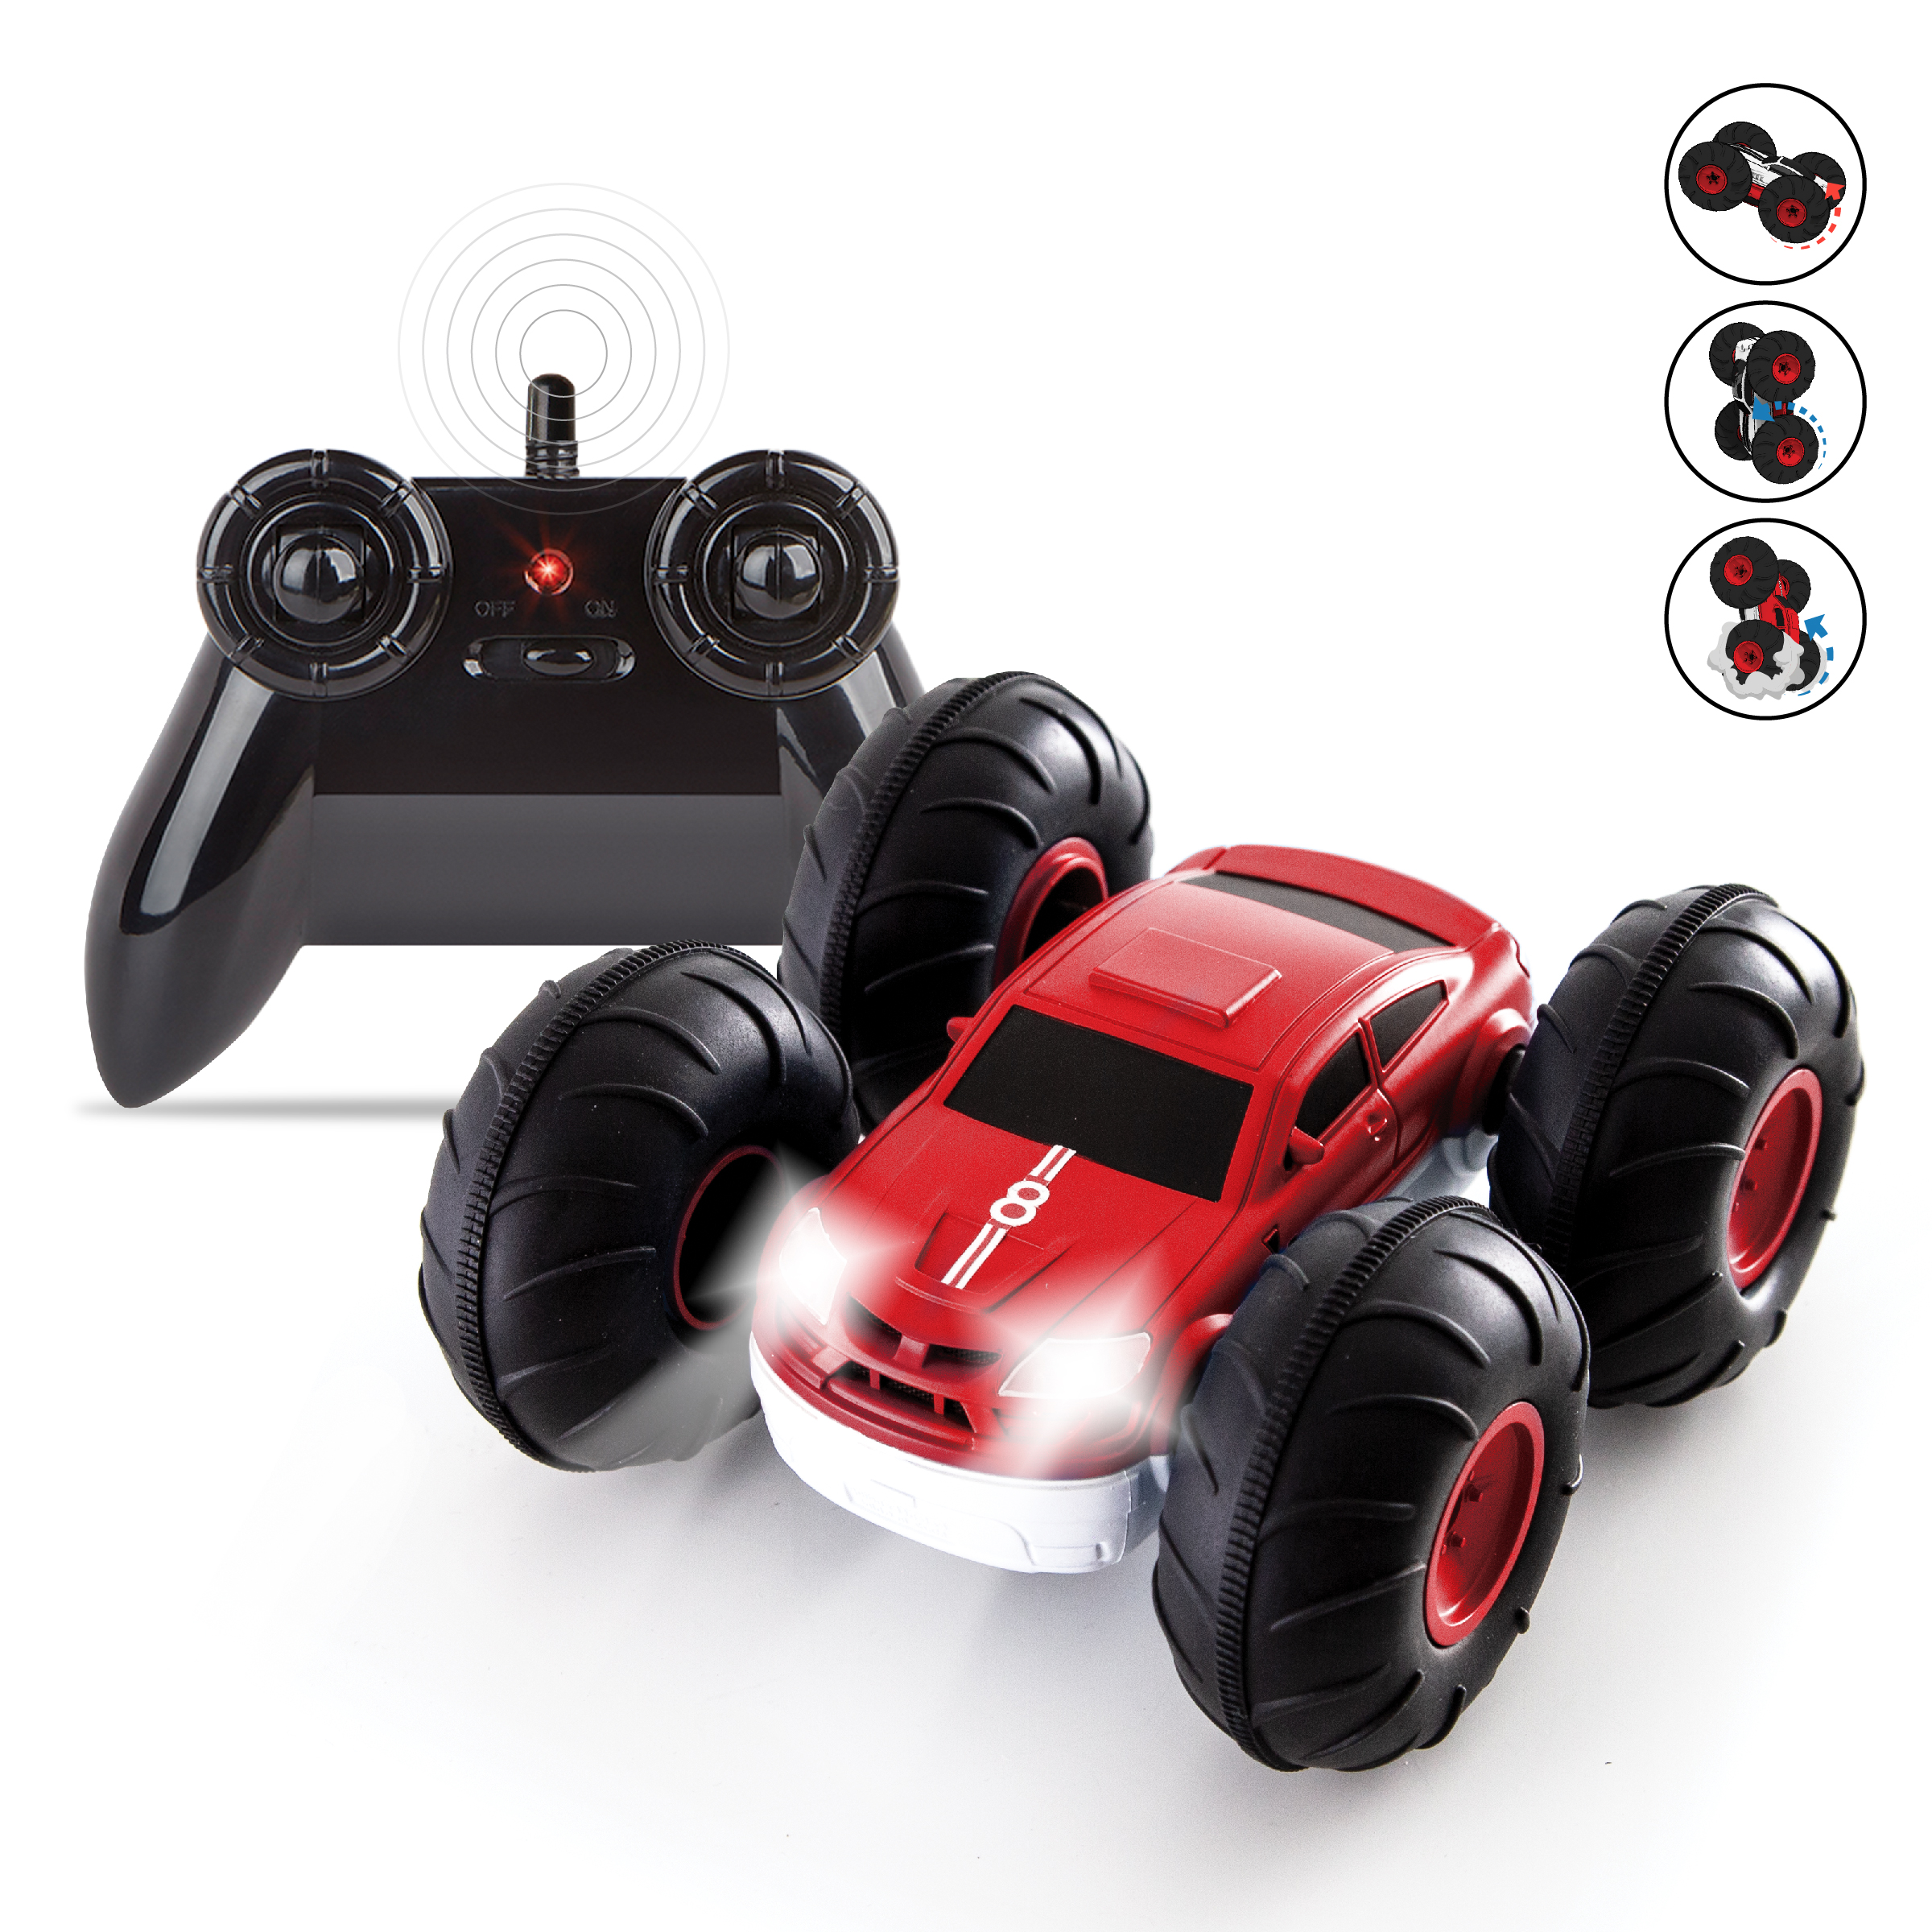 Sharper Image Remote Control RC Cars Flip Stunt Rally Car Toy for Kids, 49 MHz, 2-in-1 Reversible Design for Racing, Cool Stunts, Tricks, Led Headlights, AAA Battery Powered, Red/White Design - image 1 of 13